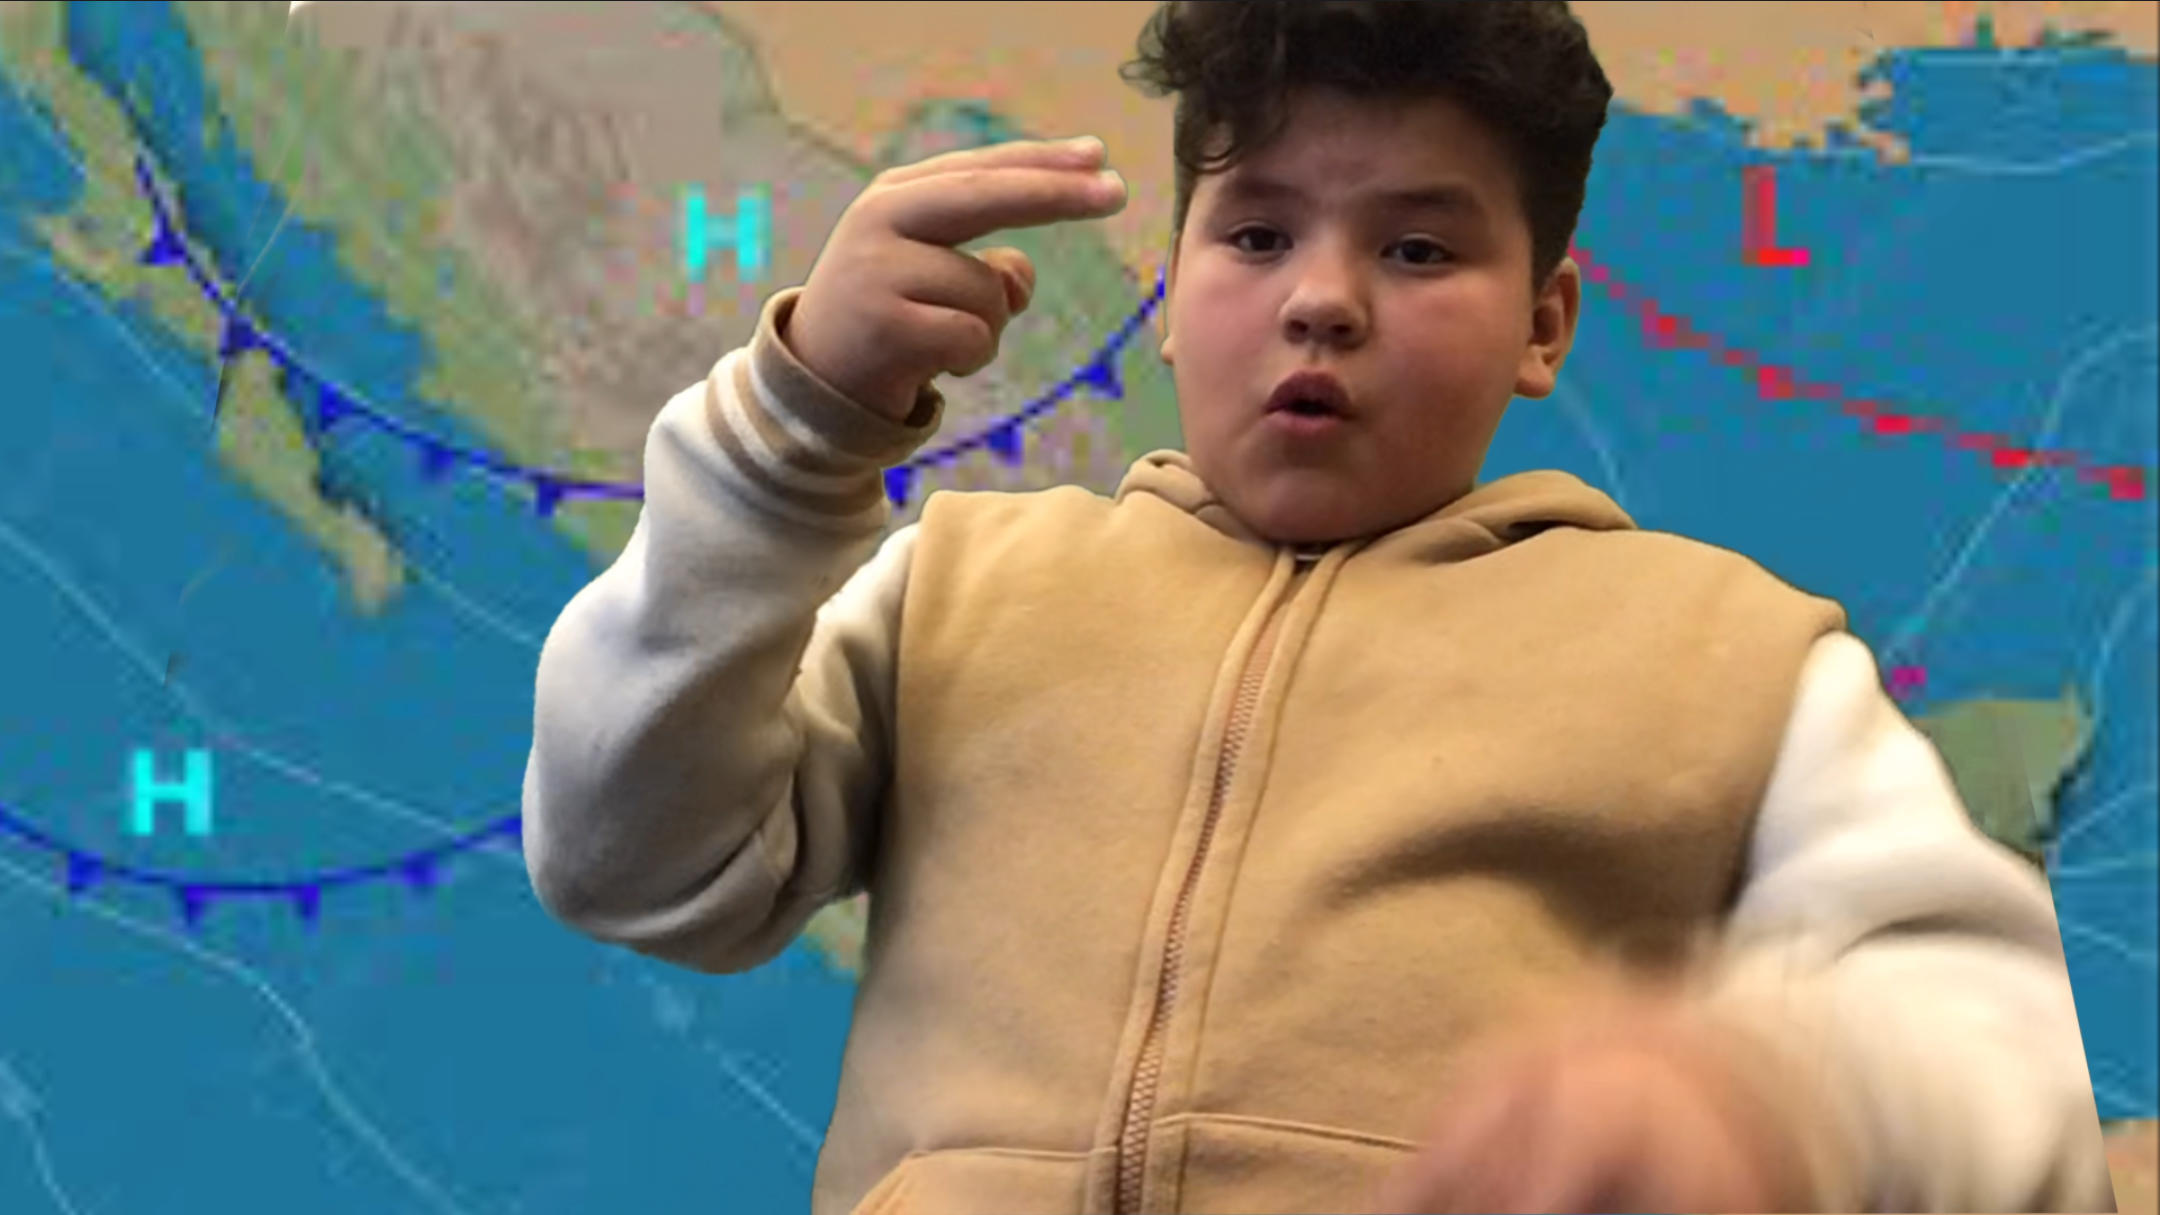 Student is signing the weather report in front of a green screen and in front of a weather map of Mexico.